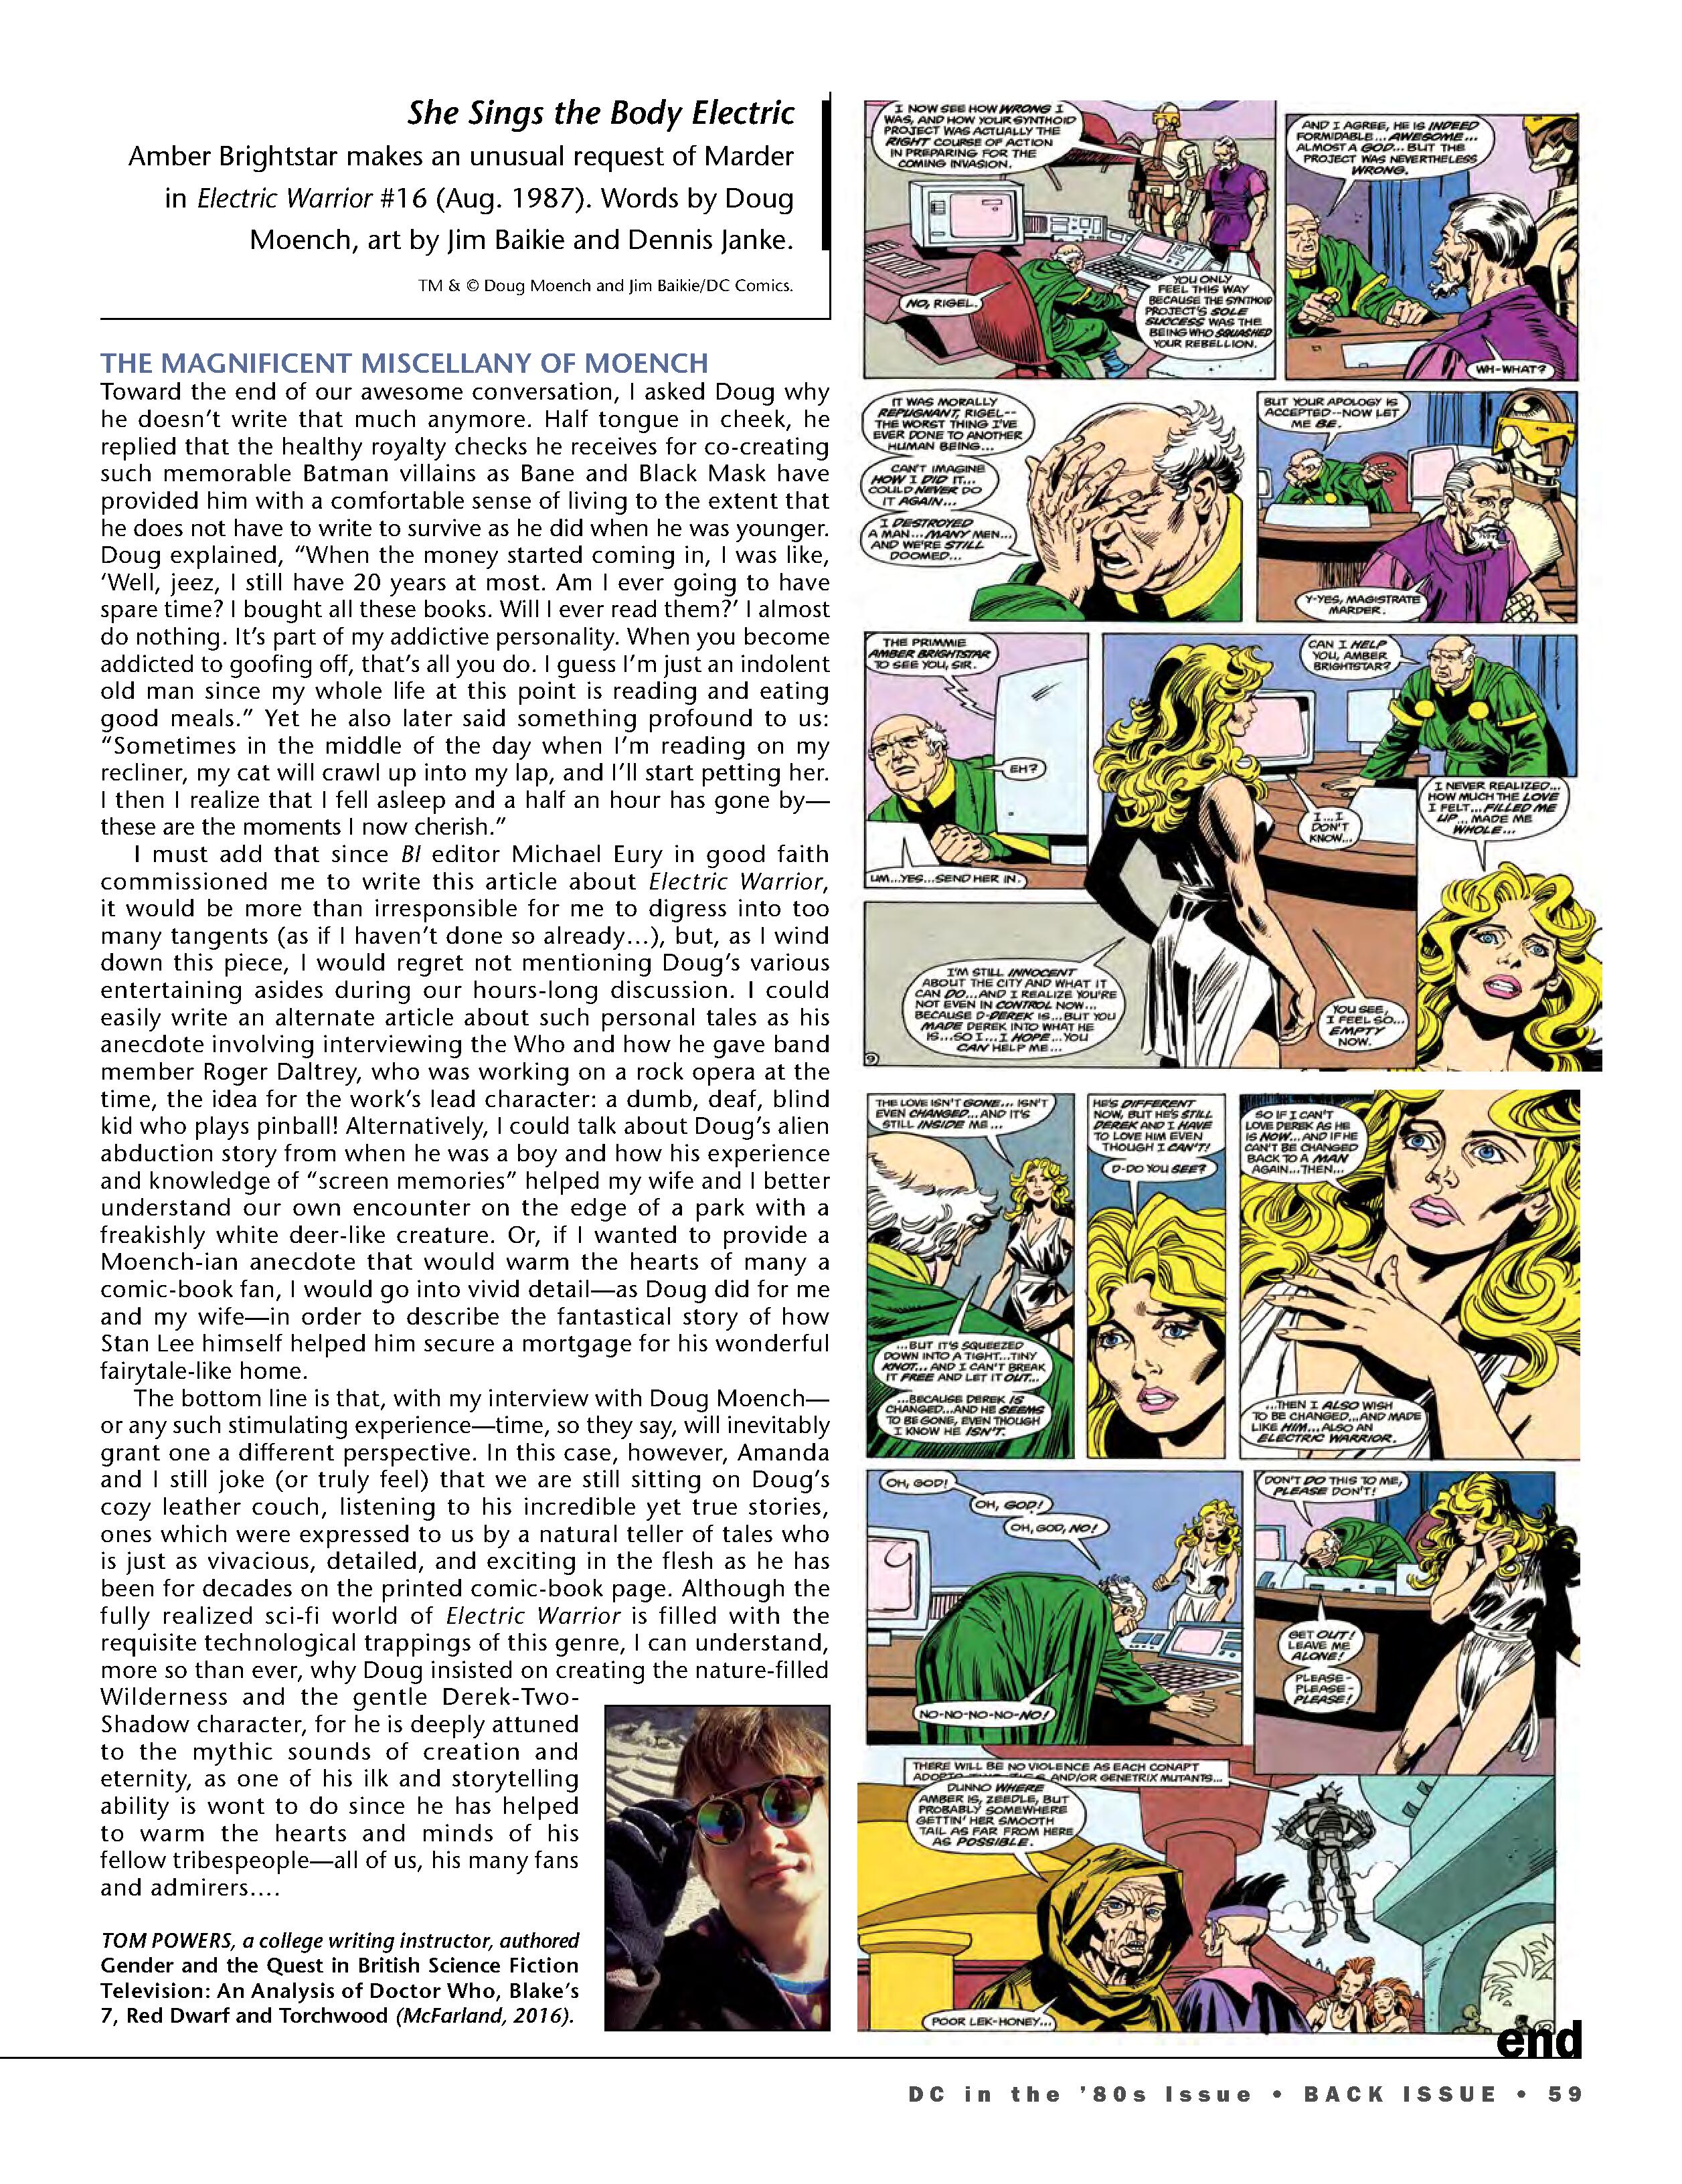 Read online Back Issue comic -  Issue #98 - 61